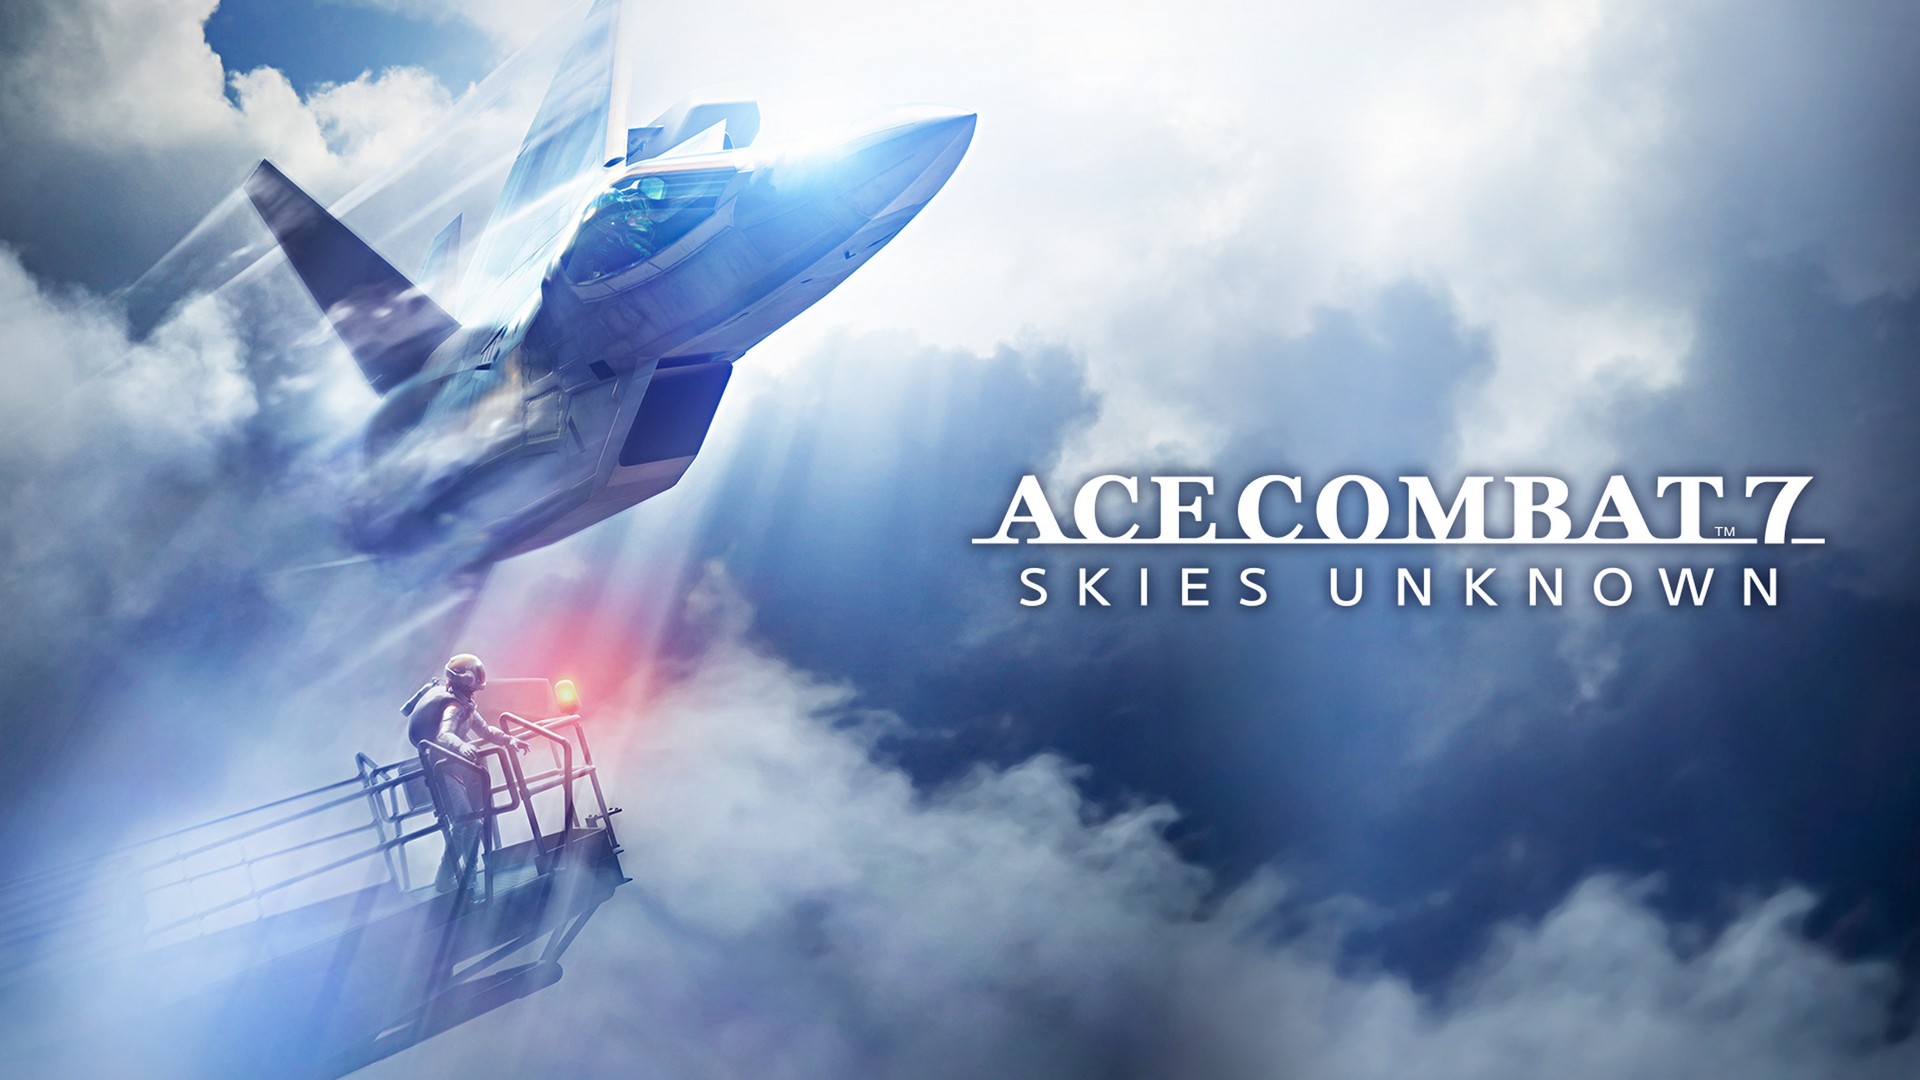 Ace Combat 7: Skies Unknown Is Coming To Nintendo Switch On July 11th